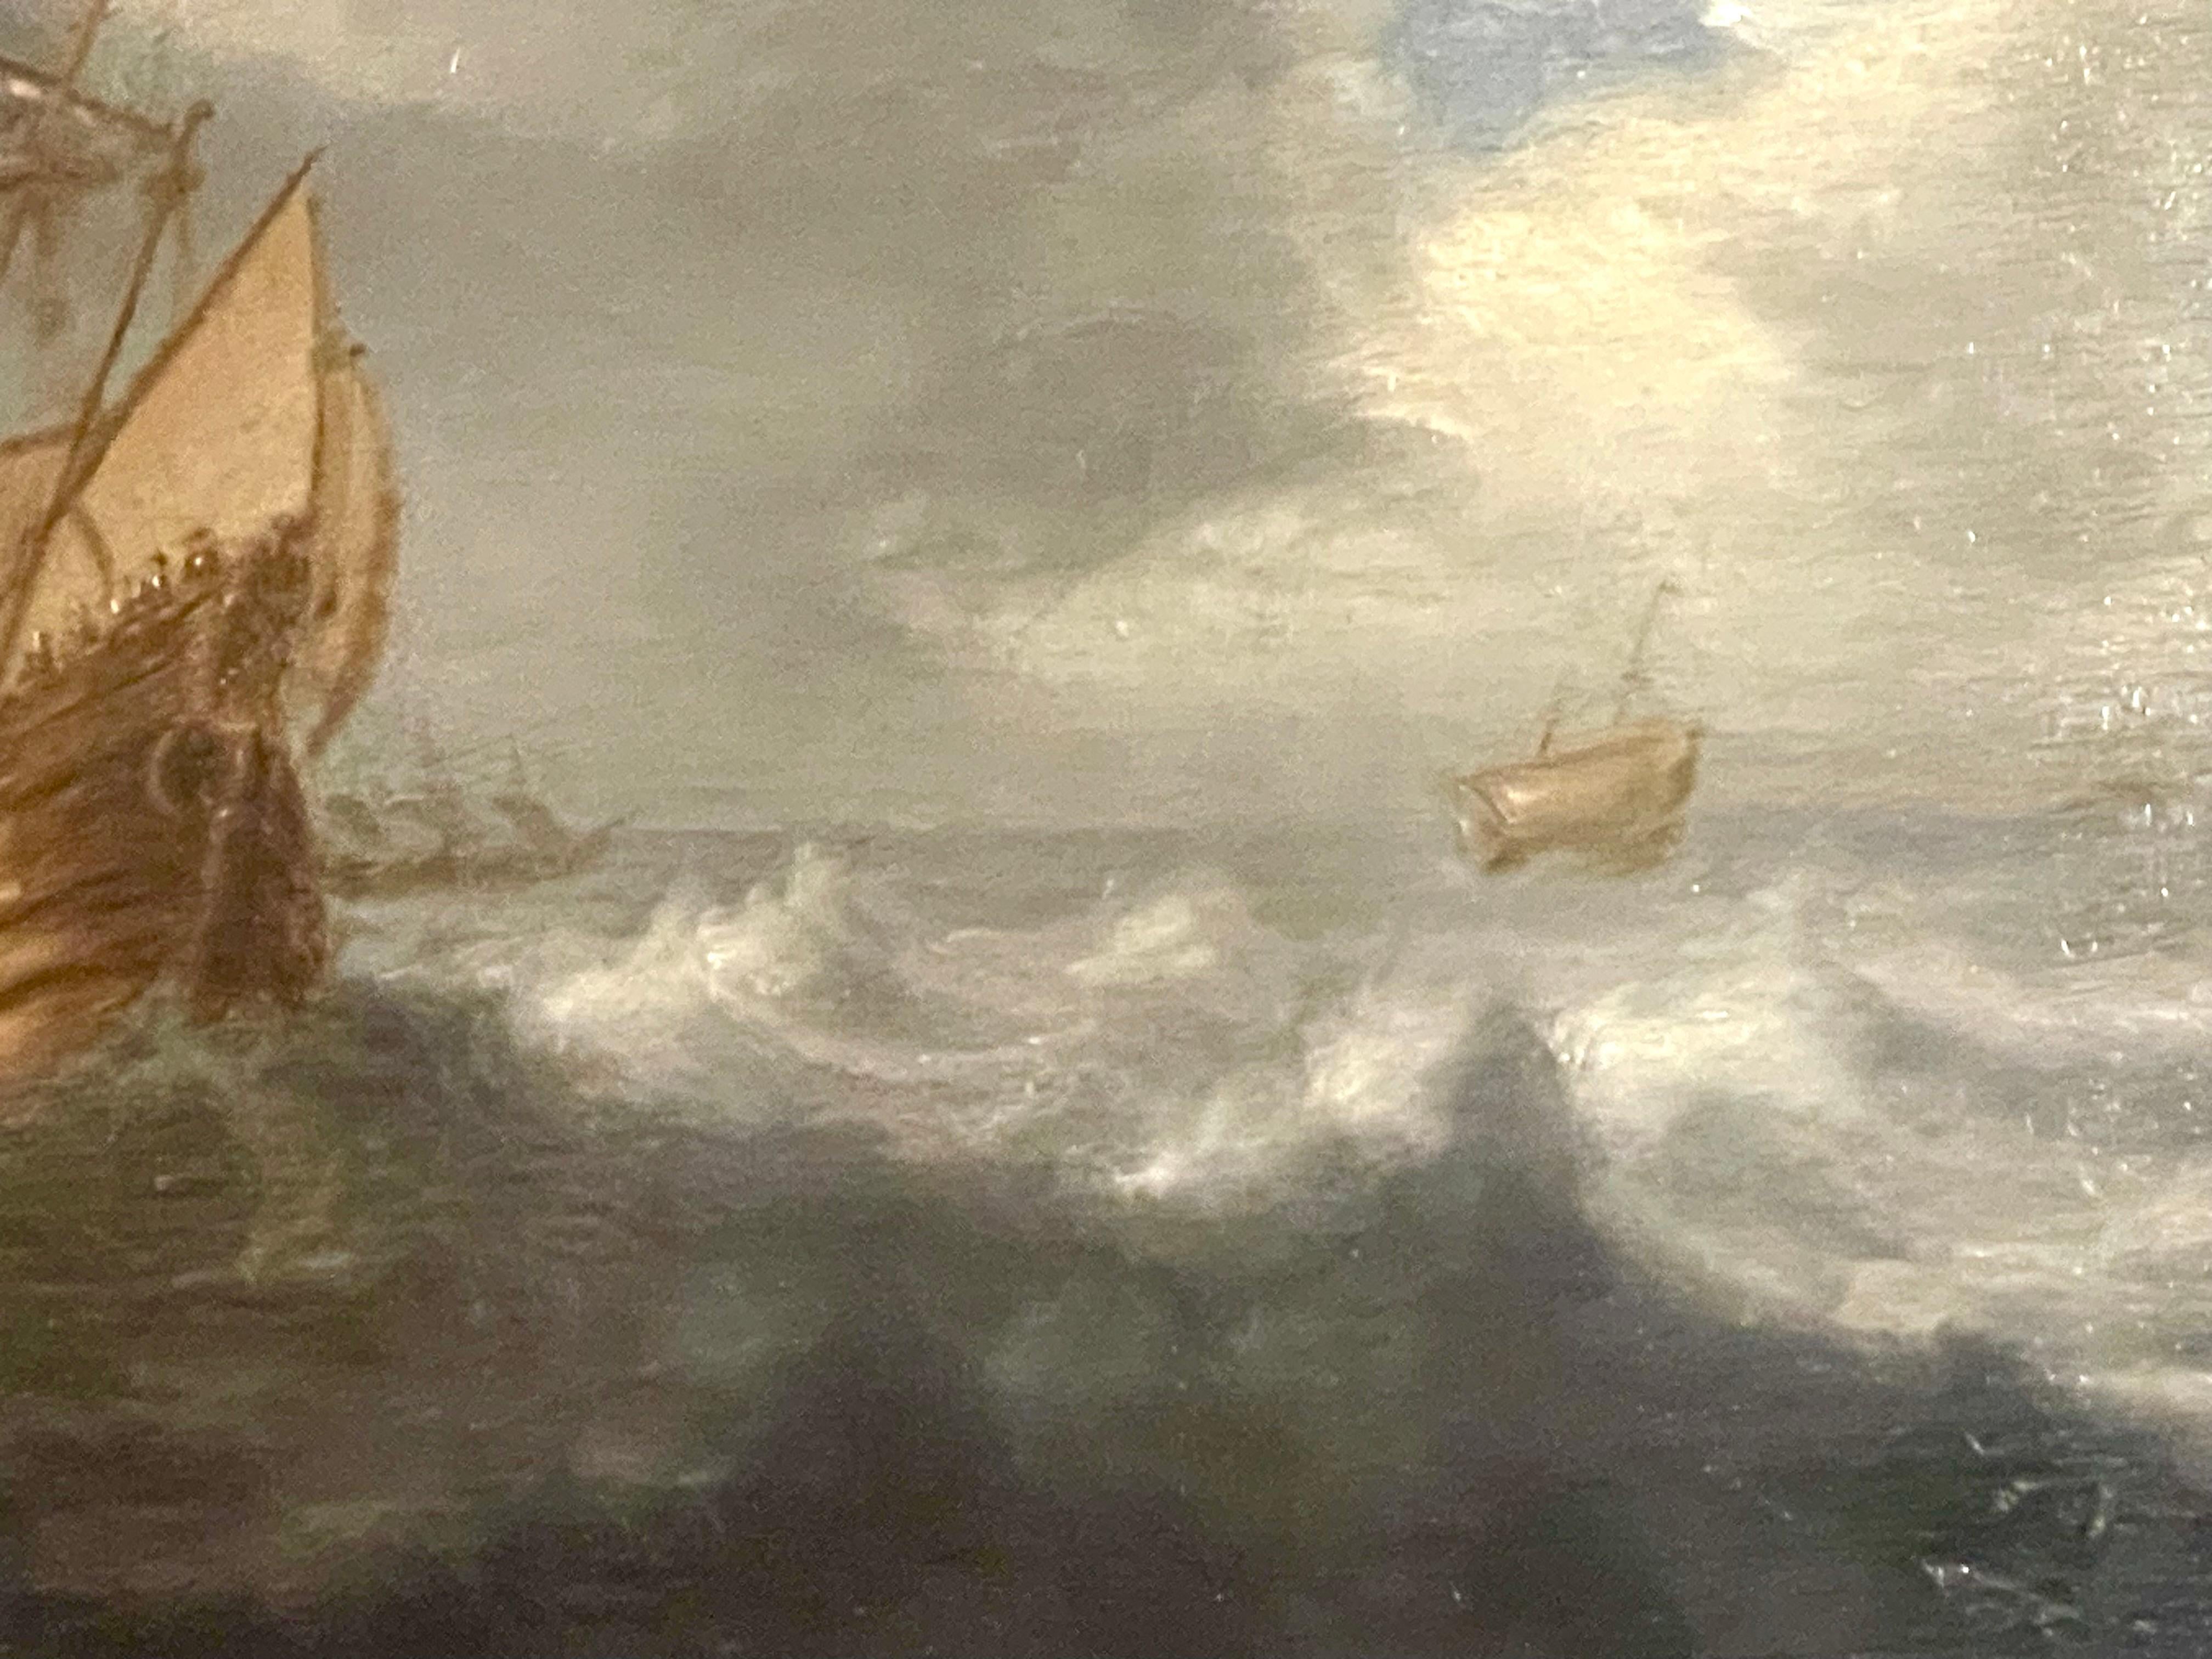 Dutch ships on rough seas 17th Century - Brown Landscape Painting by Unknown